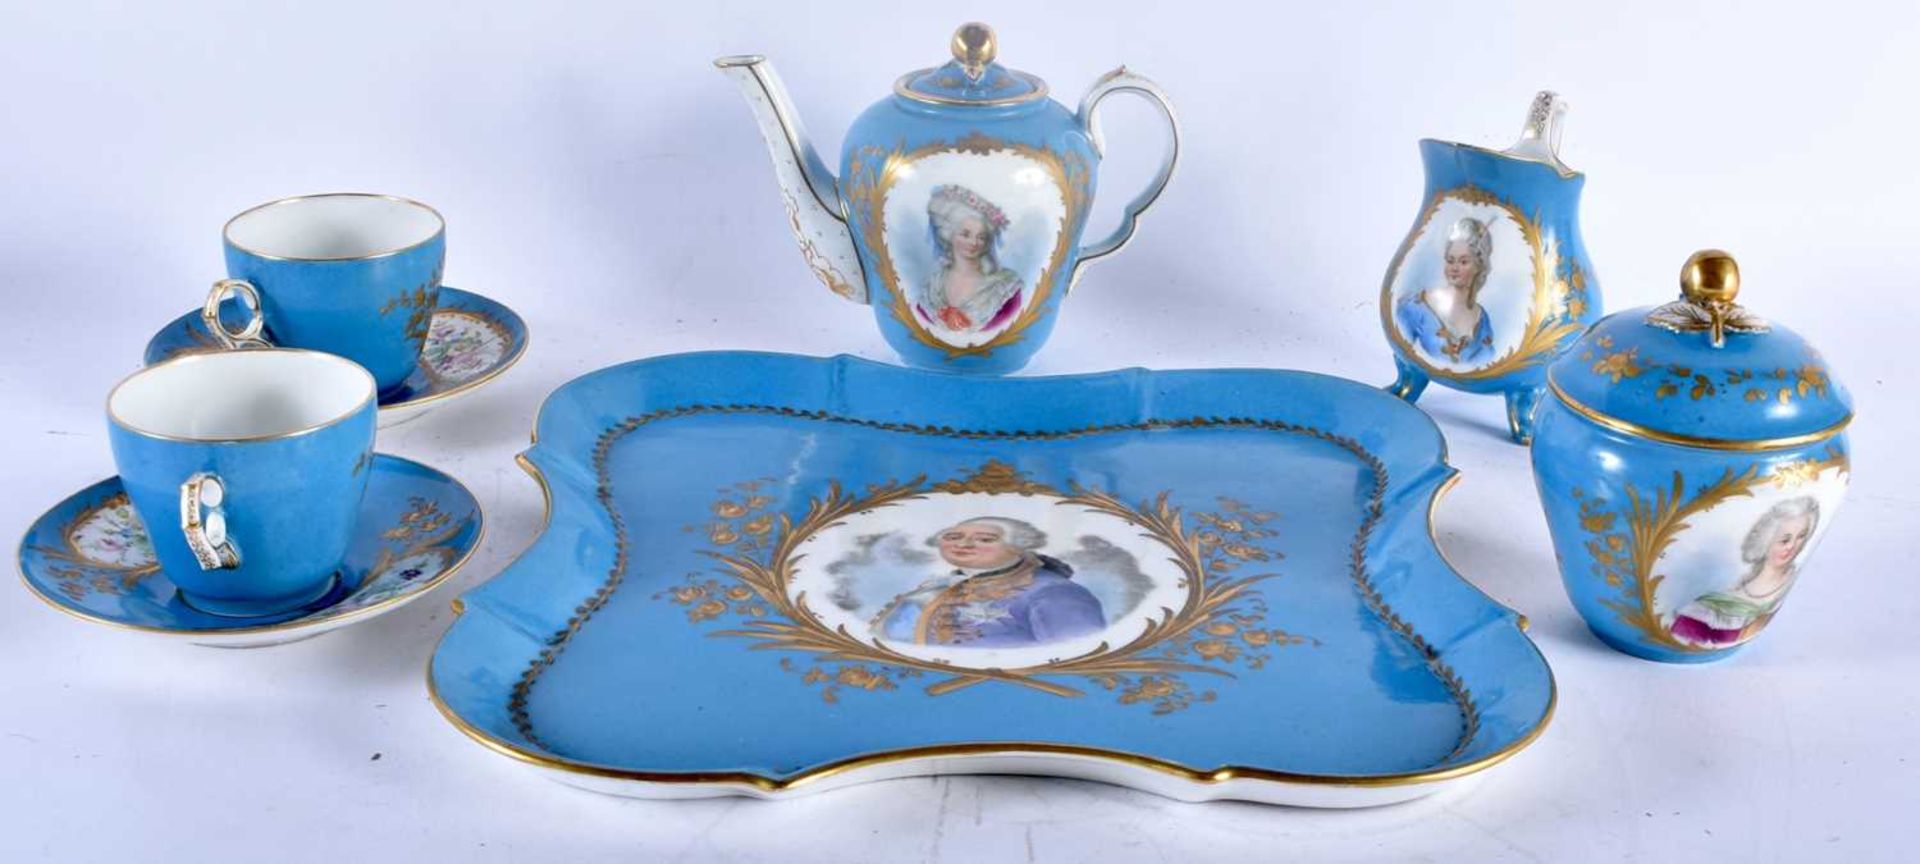 A 19TH CENTURY FRENCH SEVRES PORCELAIN TETE A TETE TEASET painted with portraits of females, on a - Image 2 of 6